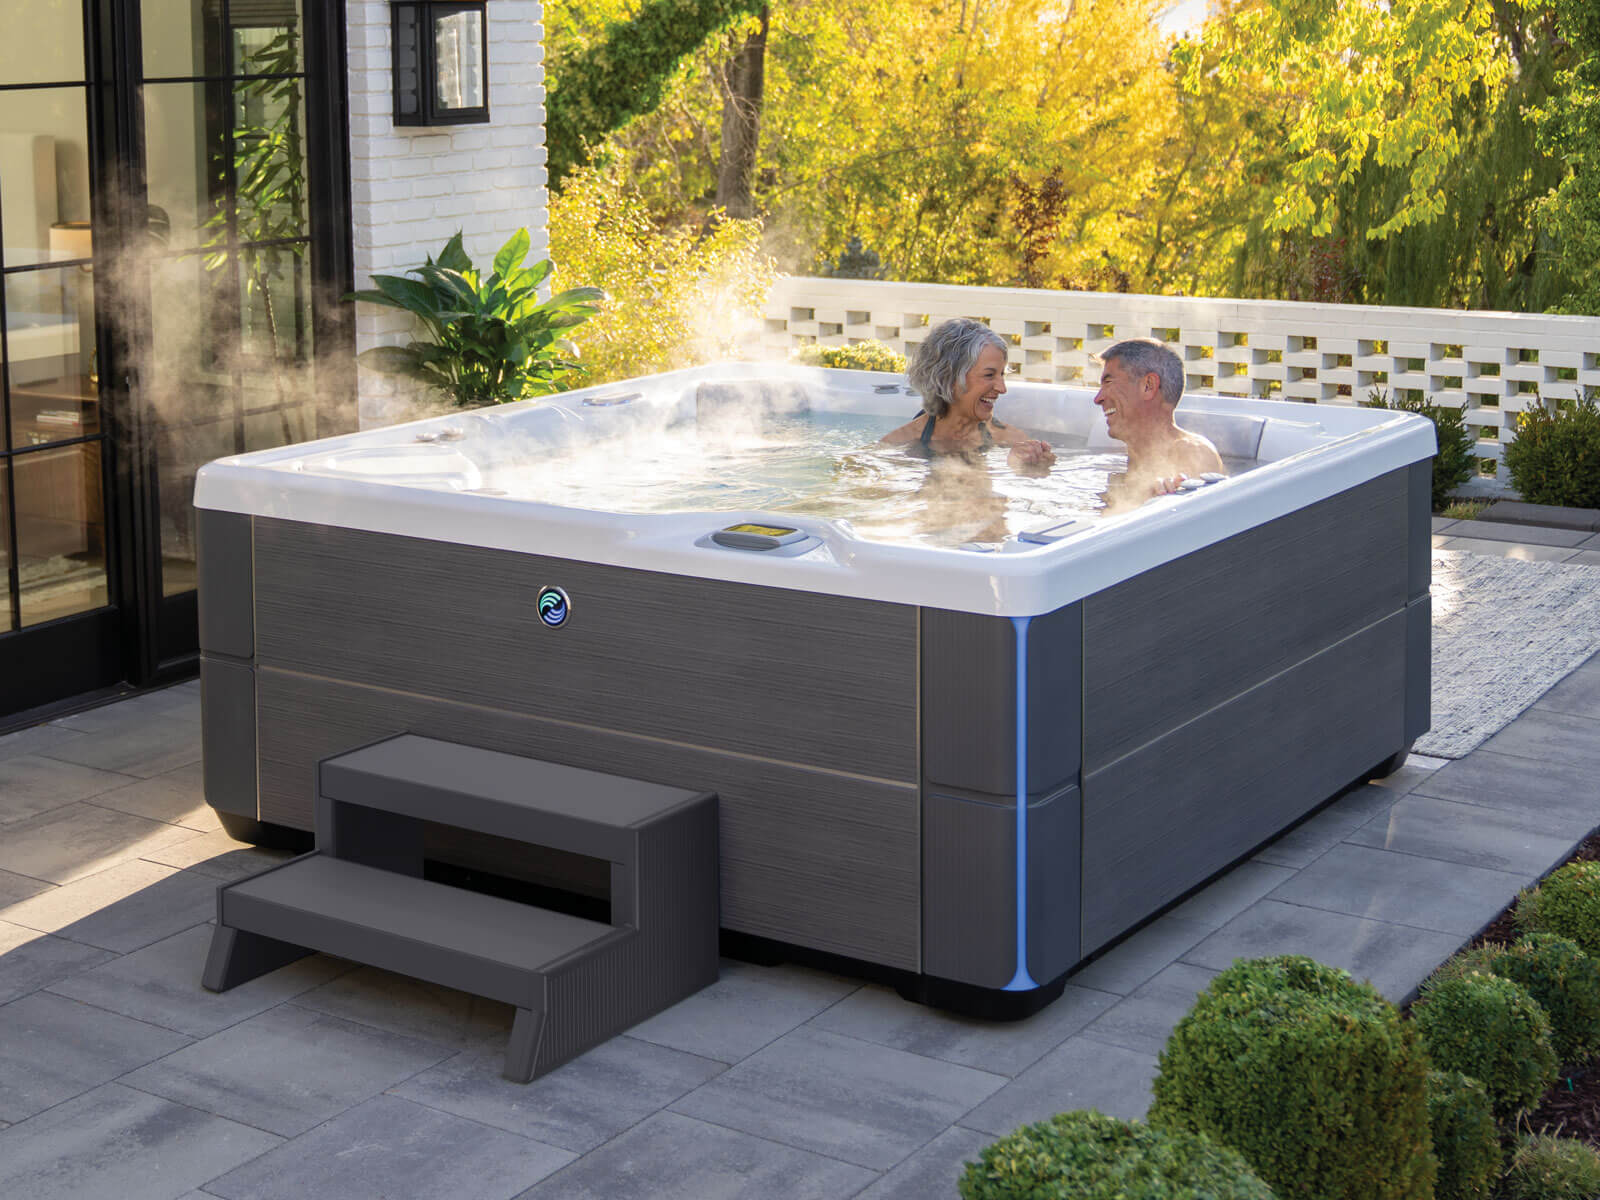 Winter Wellness: The Benefits of Great Atlantic Hot Tubs and Swim Spas in Cold Weather